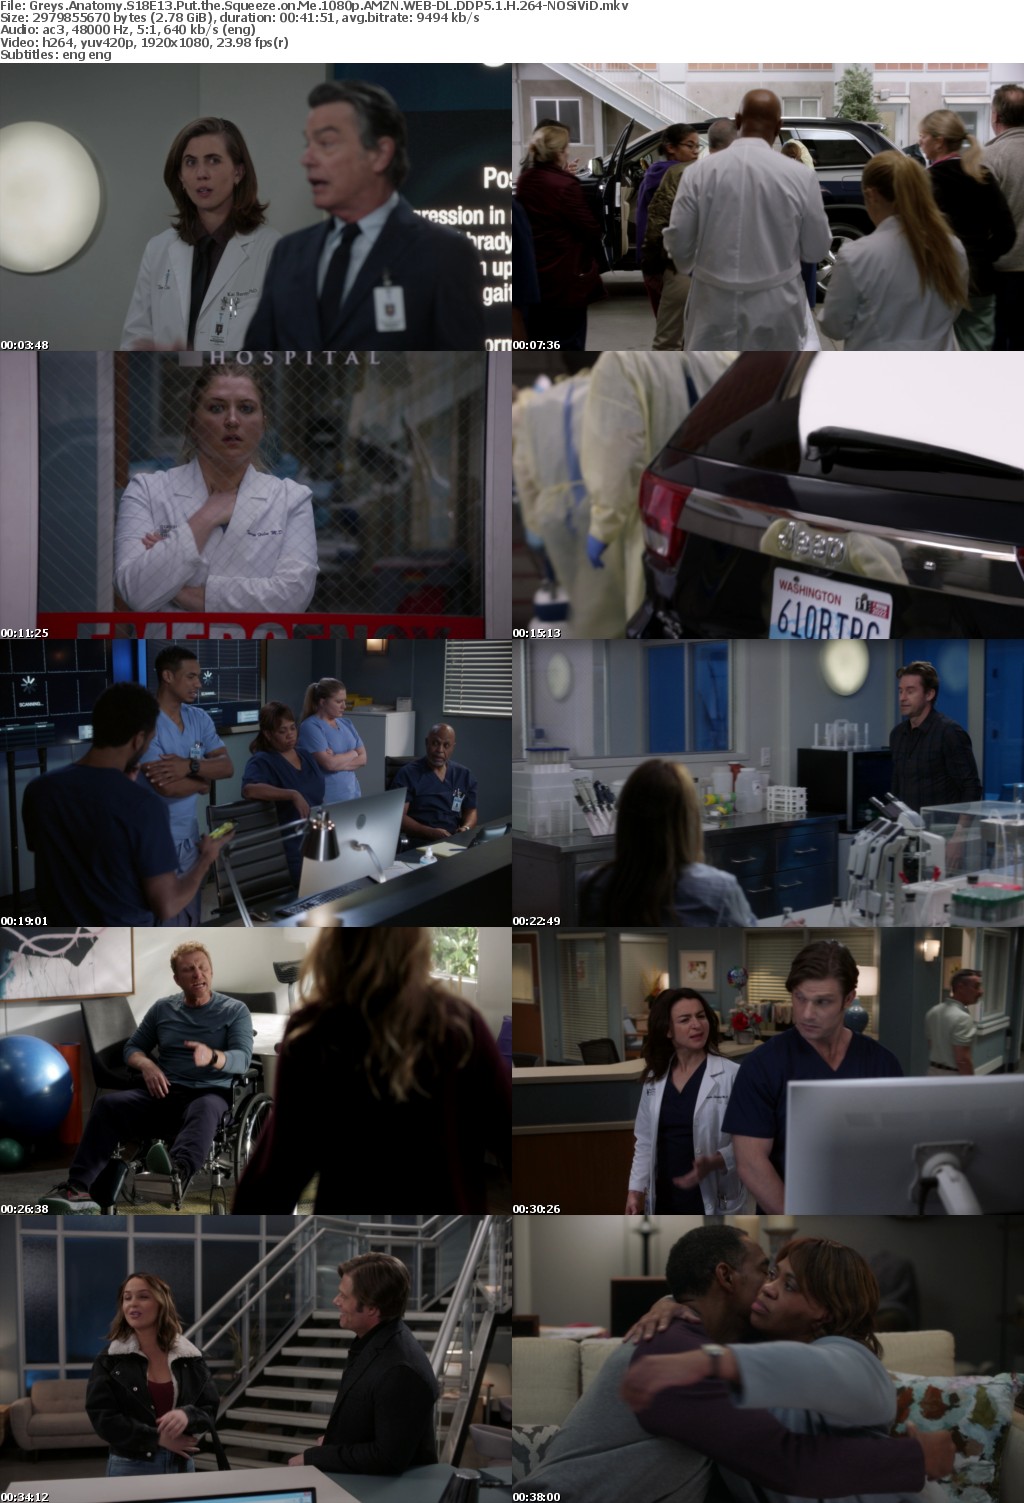 Greys Anatomy S18E13 Put the Squeeze on Me 1080p AMZN WEBRip DDP5 1 x264-NOSiViD